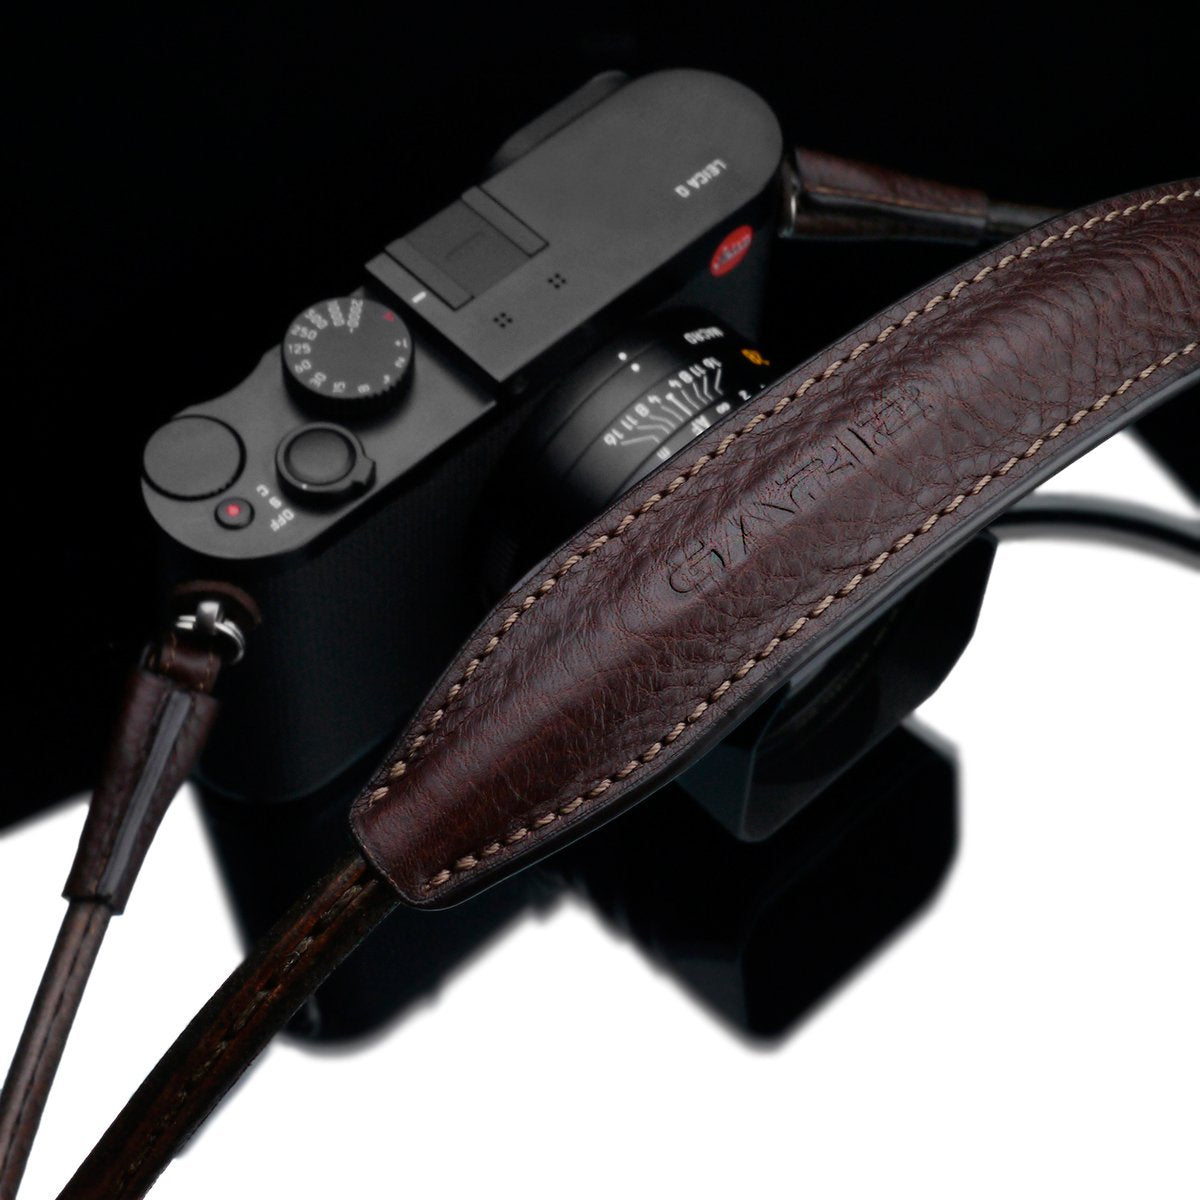 Gariz XS-CSNLBR Large Size Genuine Leather Camera Neck Strap for Mirrorless Cameras Brown